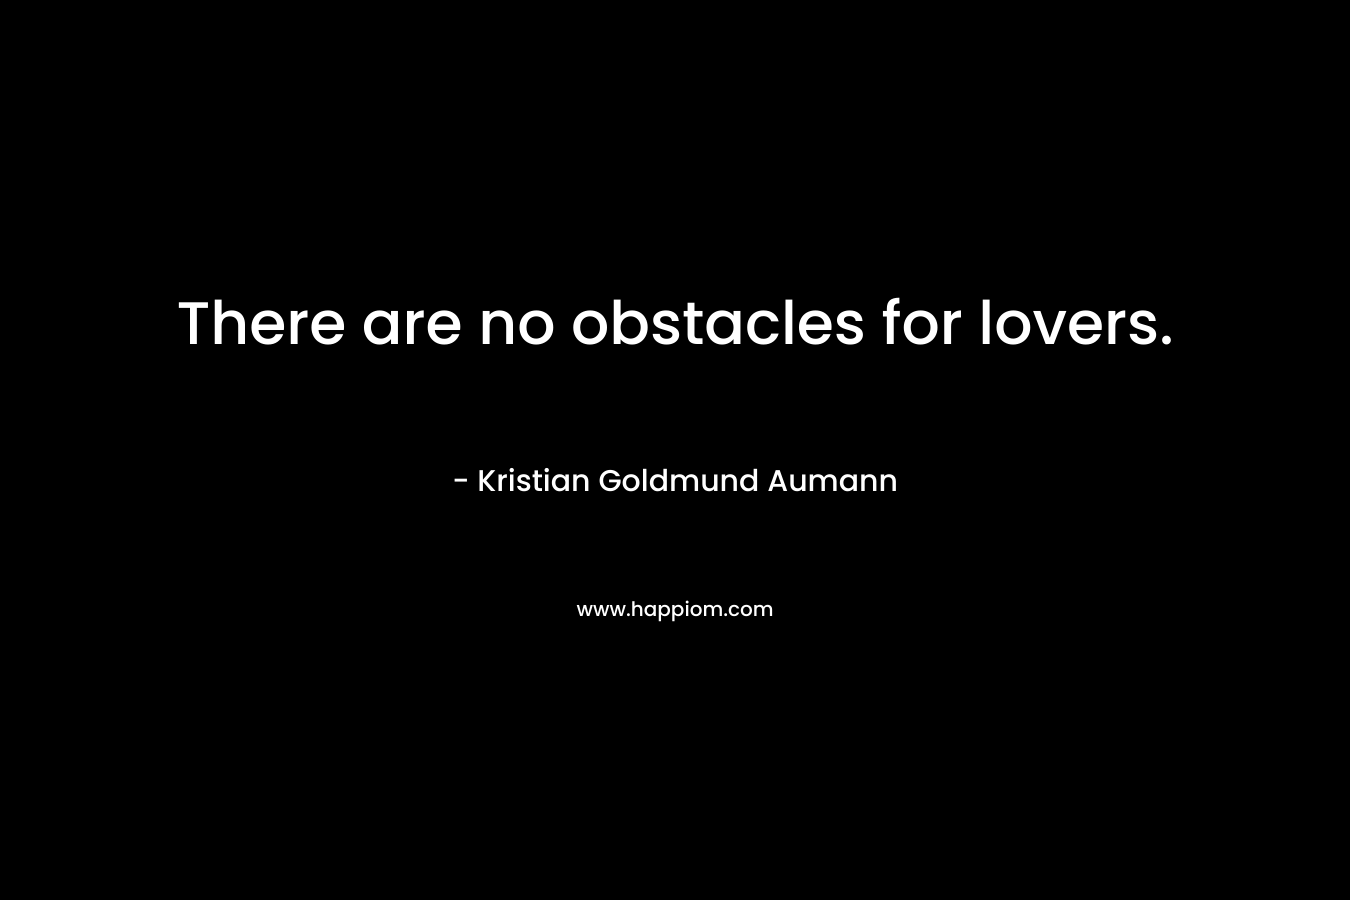 There are no obstacles for lovers. – Kristian Goldmund Aumann